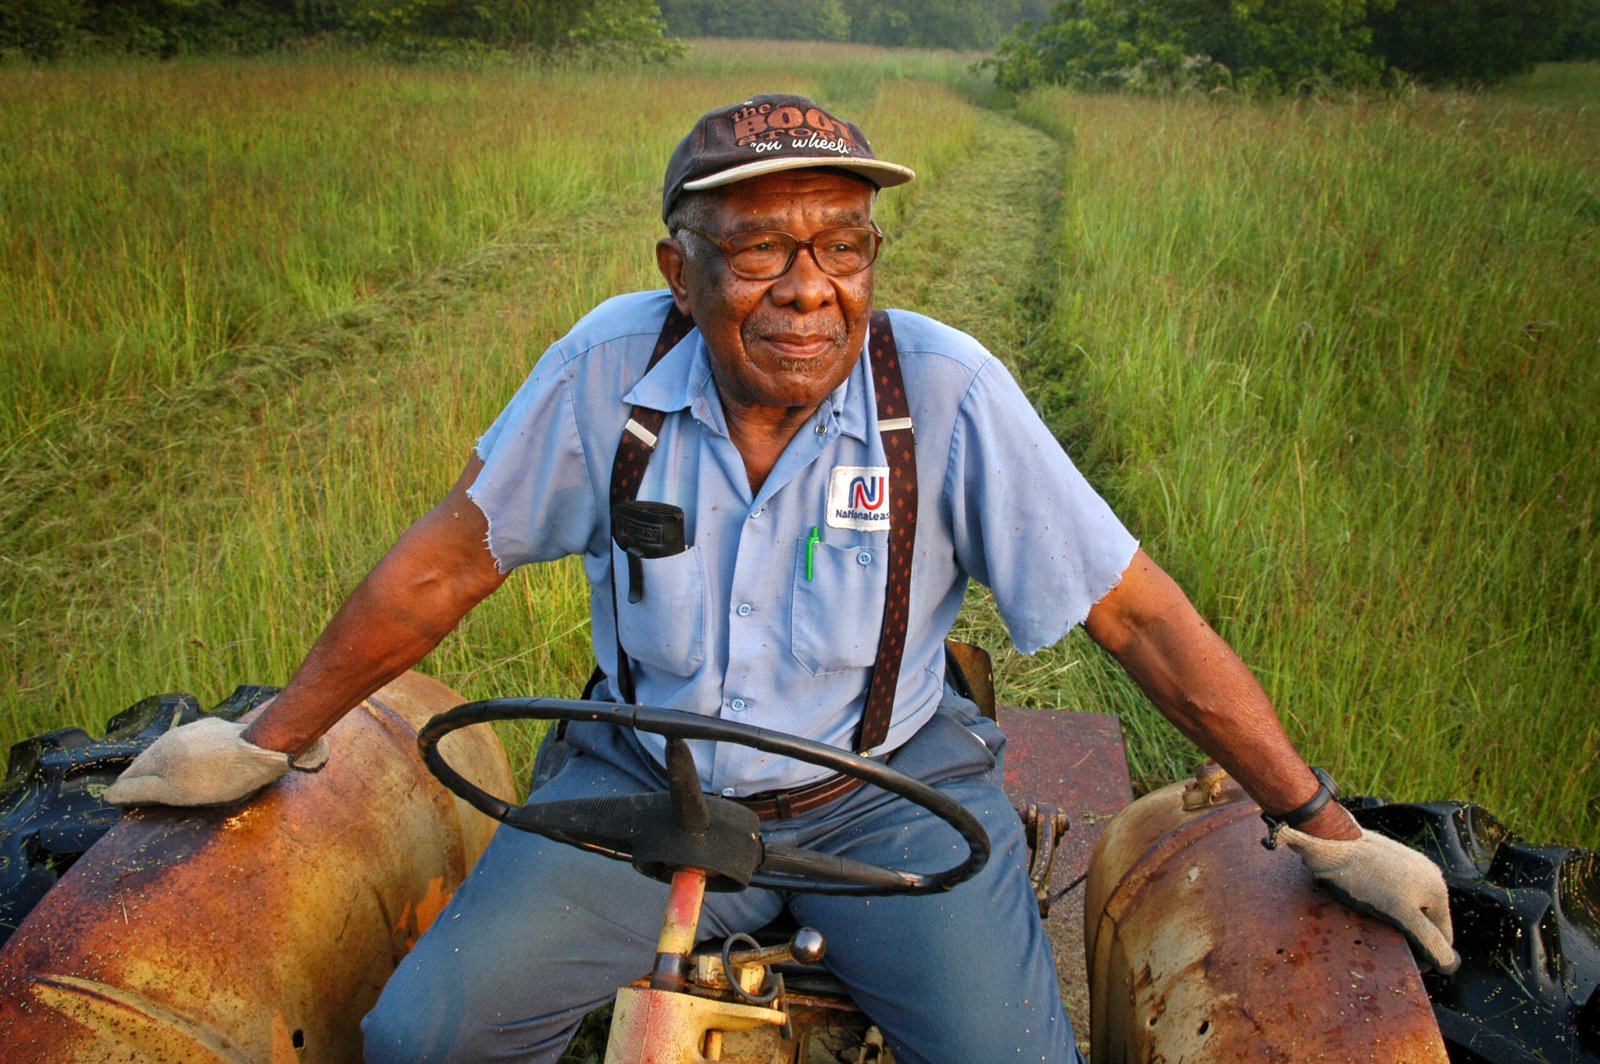 Eddie Cotton, 82, Hermanville, MS,  clears a field for a fall crop of hay, using a 40-yr-old tractor. He is among thousands of black farmers denied federal loans in past years. 
"They took away my ability to provide  for my family," he says of the discrimination.

©Robin Nelson/ZUMA